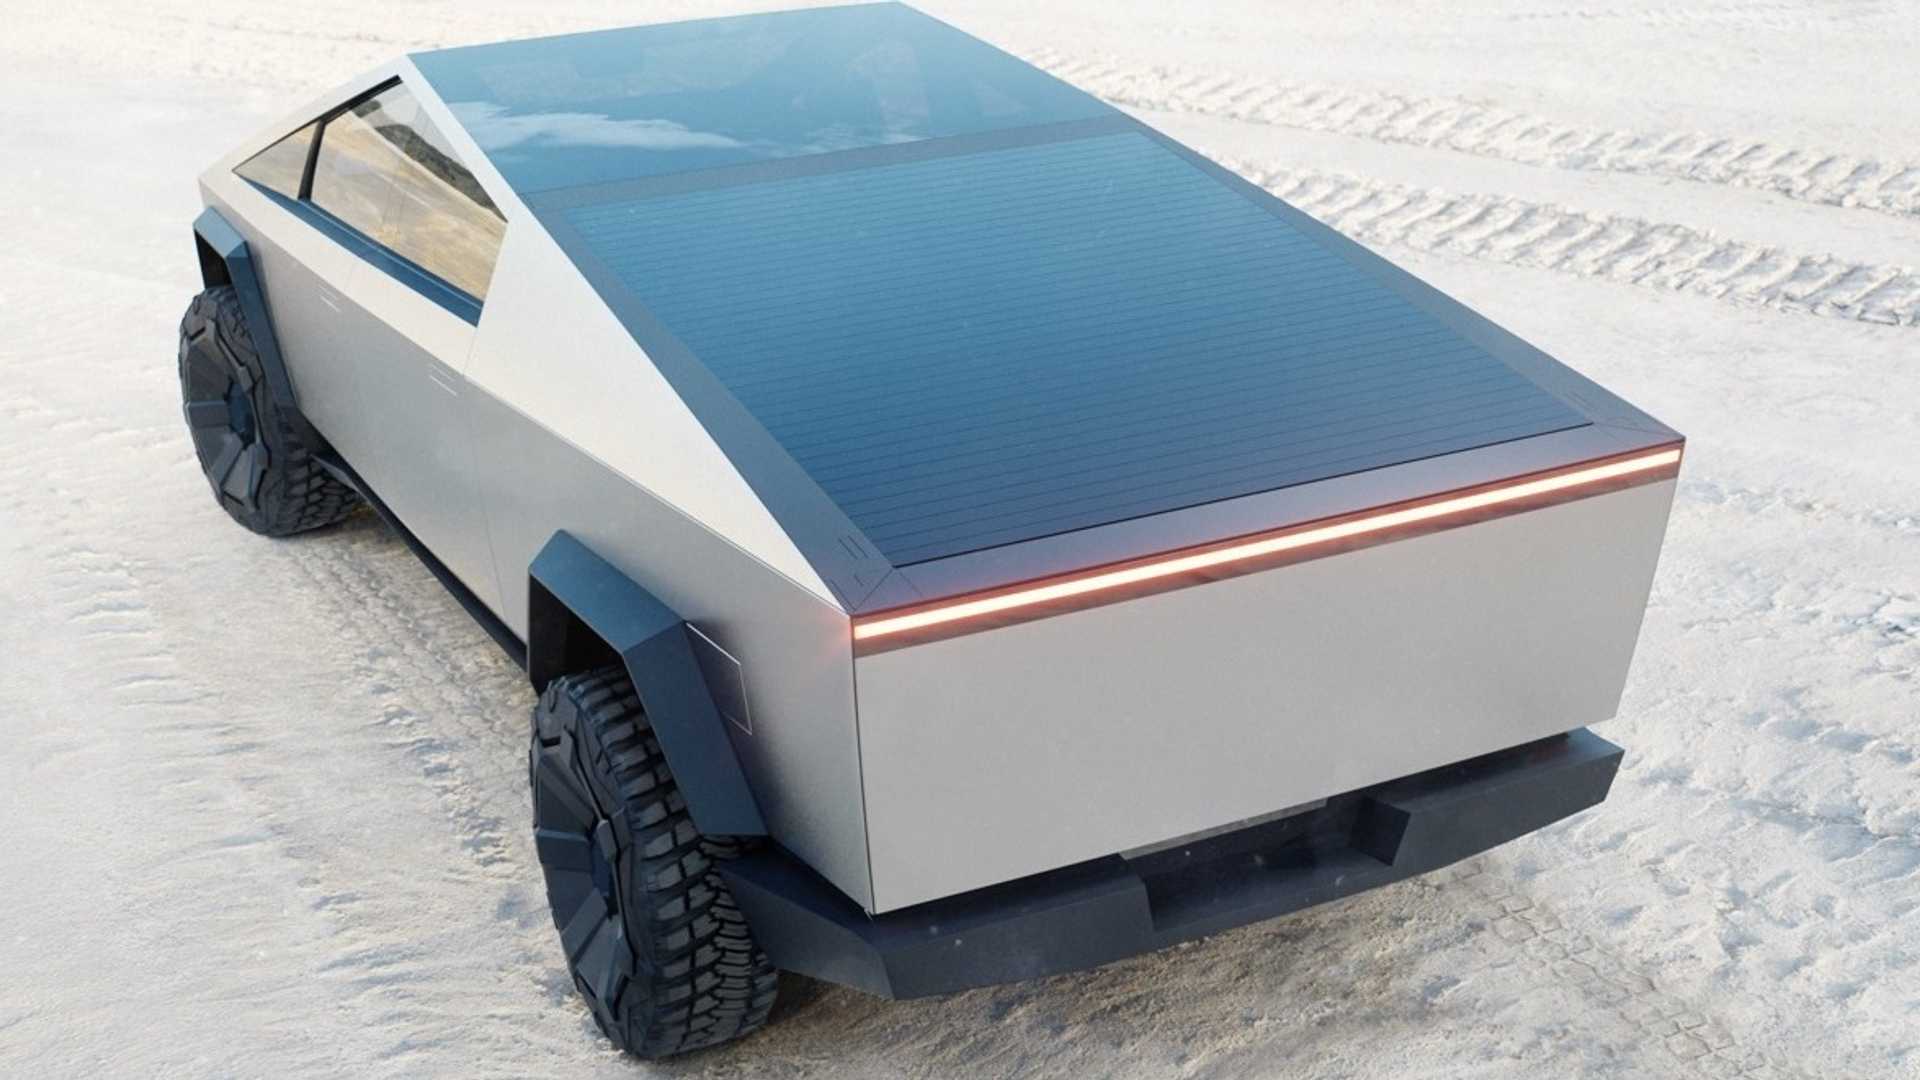 Tesla Cybertruck Videos Show Roll Down Bed Cover, 911 Drag Race